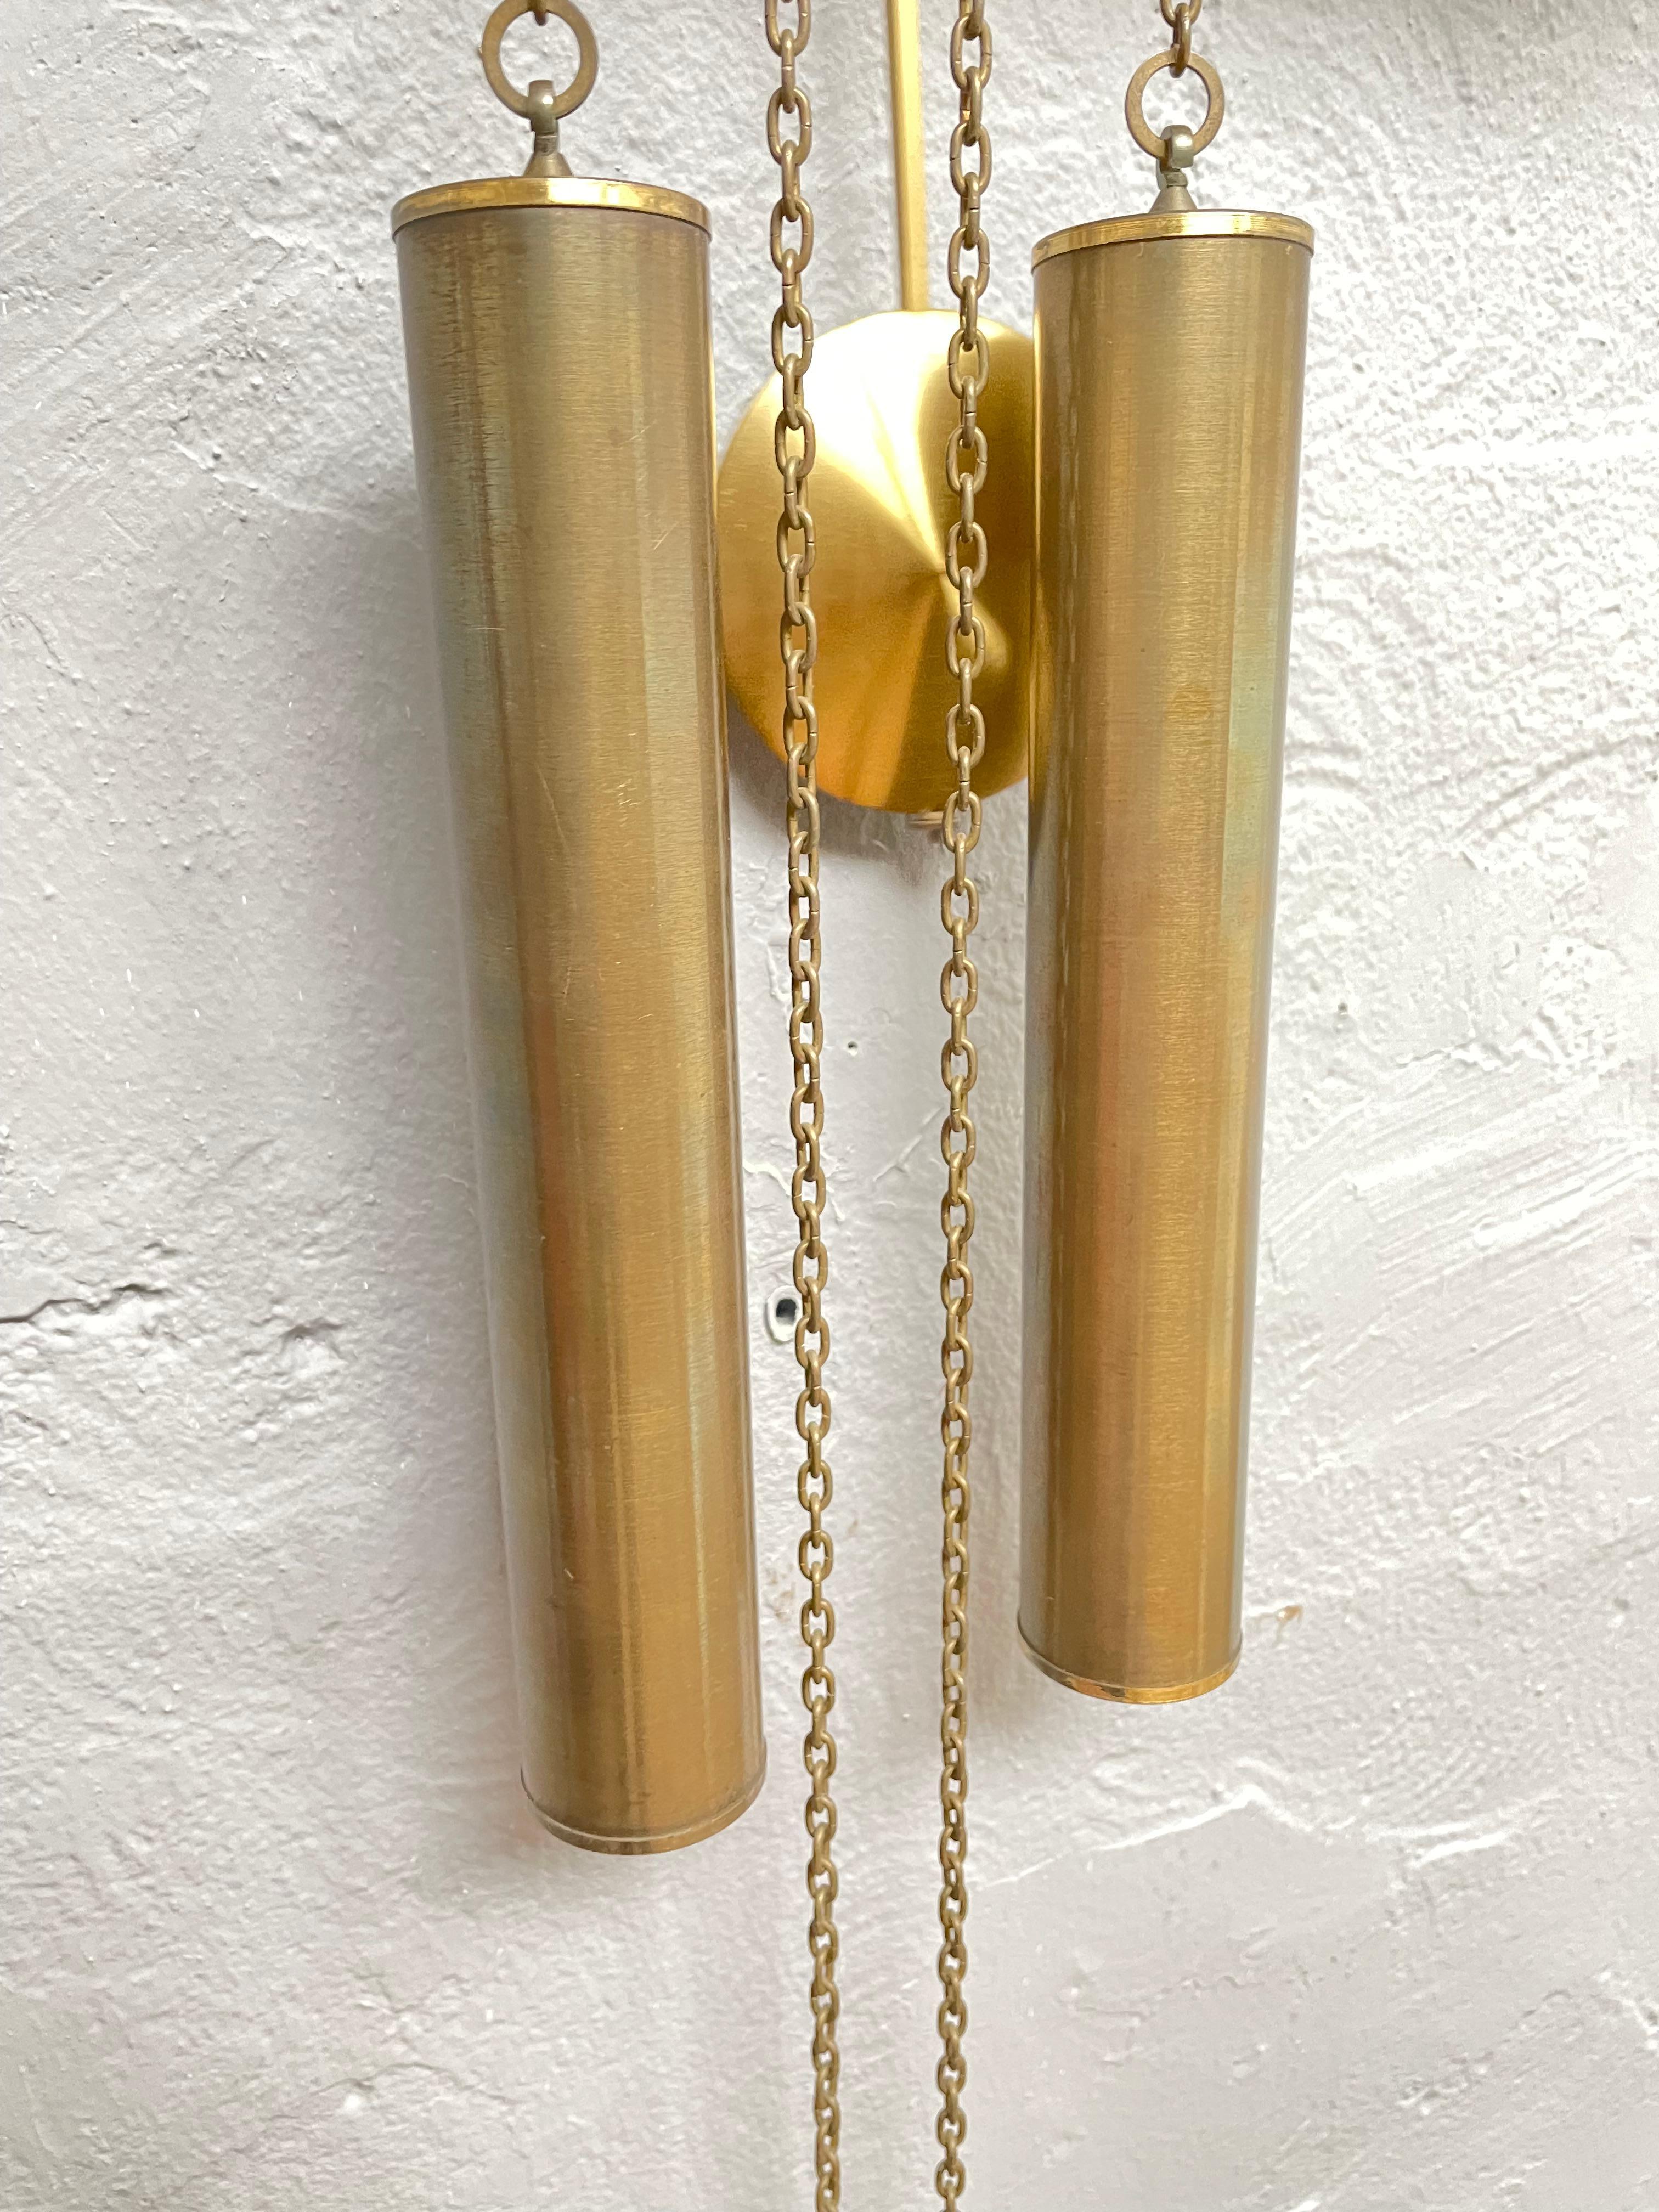 Mid-20th Century Vintage Hans Christian Andersen Pendulum Wall Clock from the 1960s For Sale